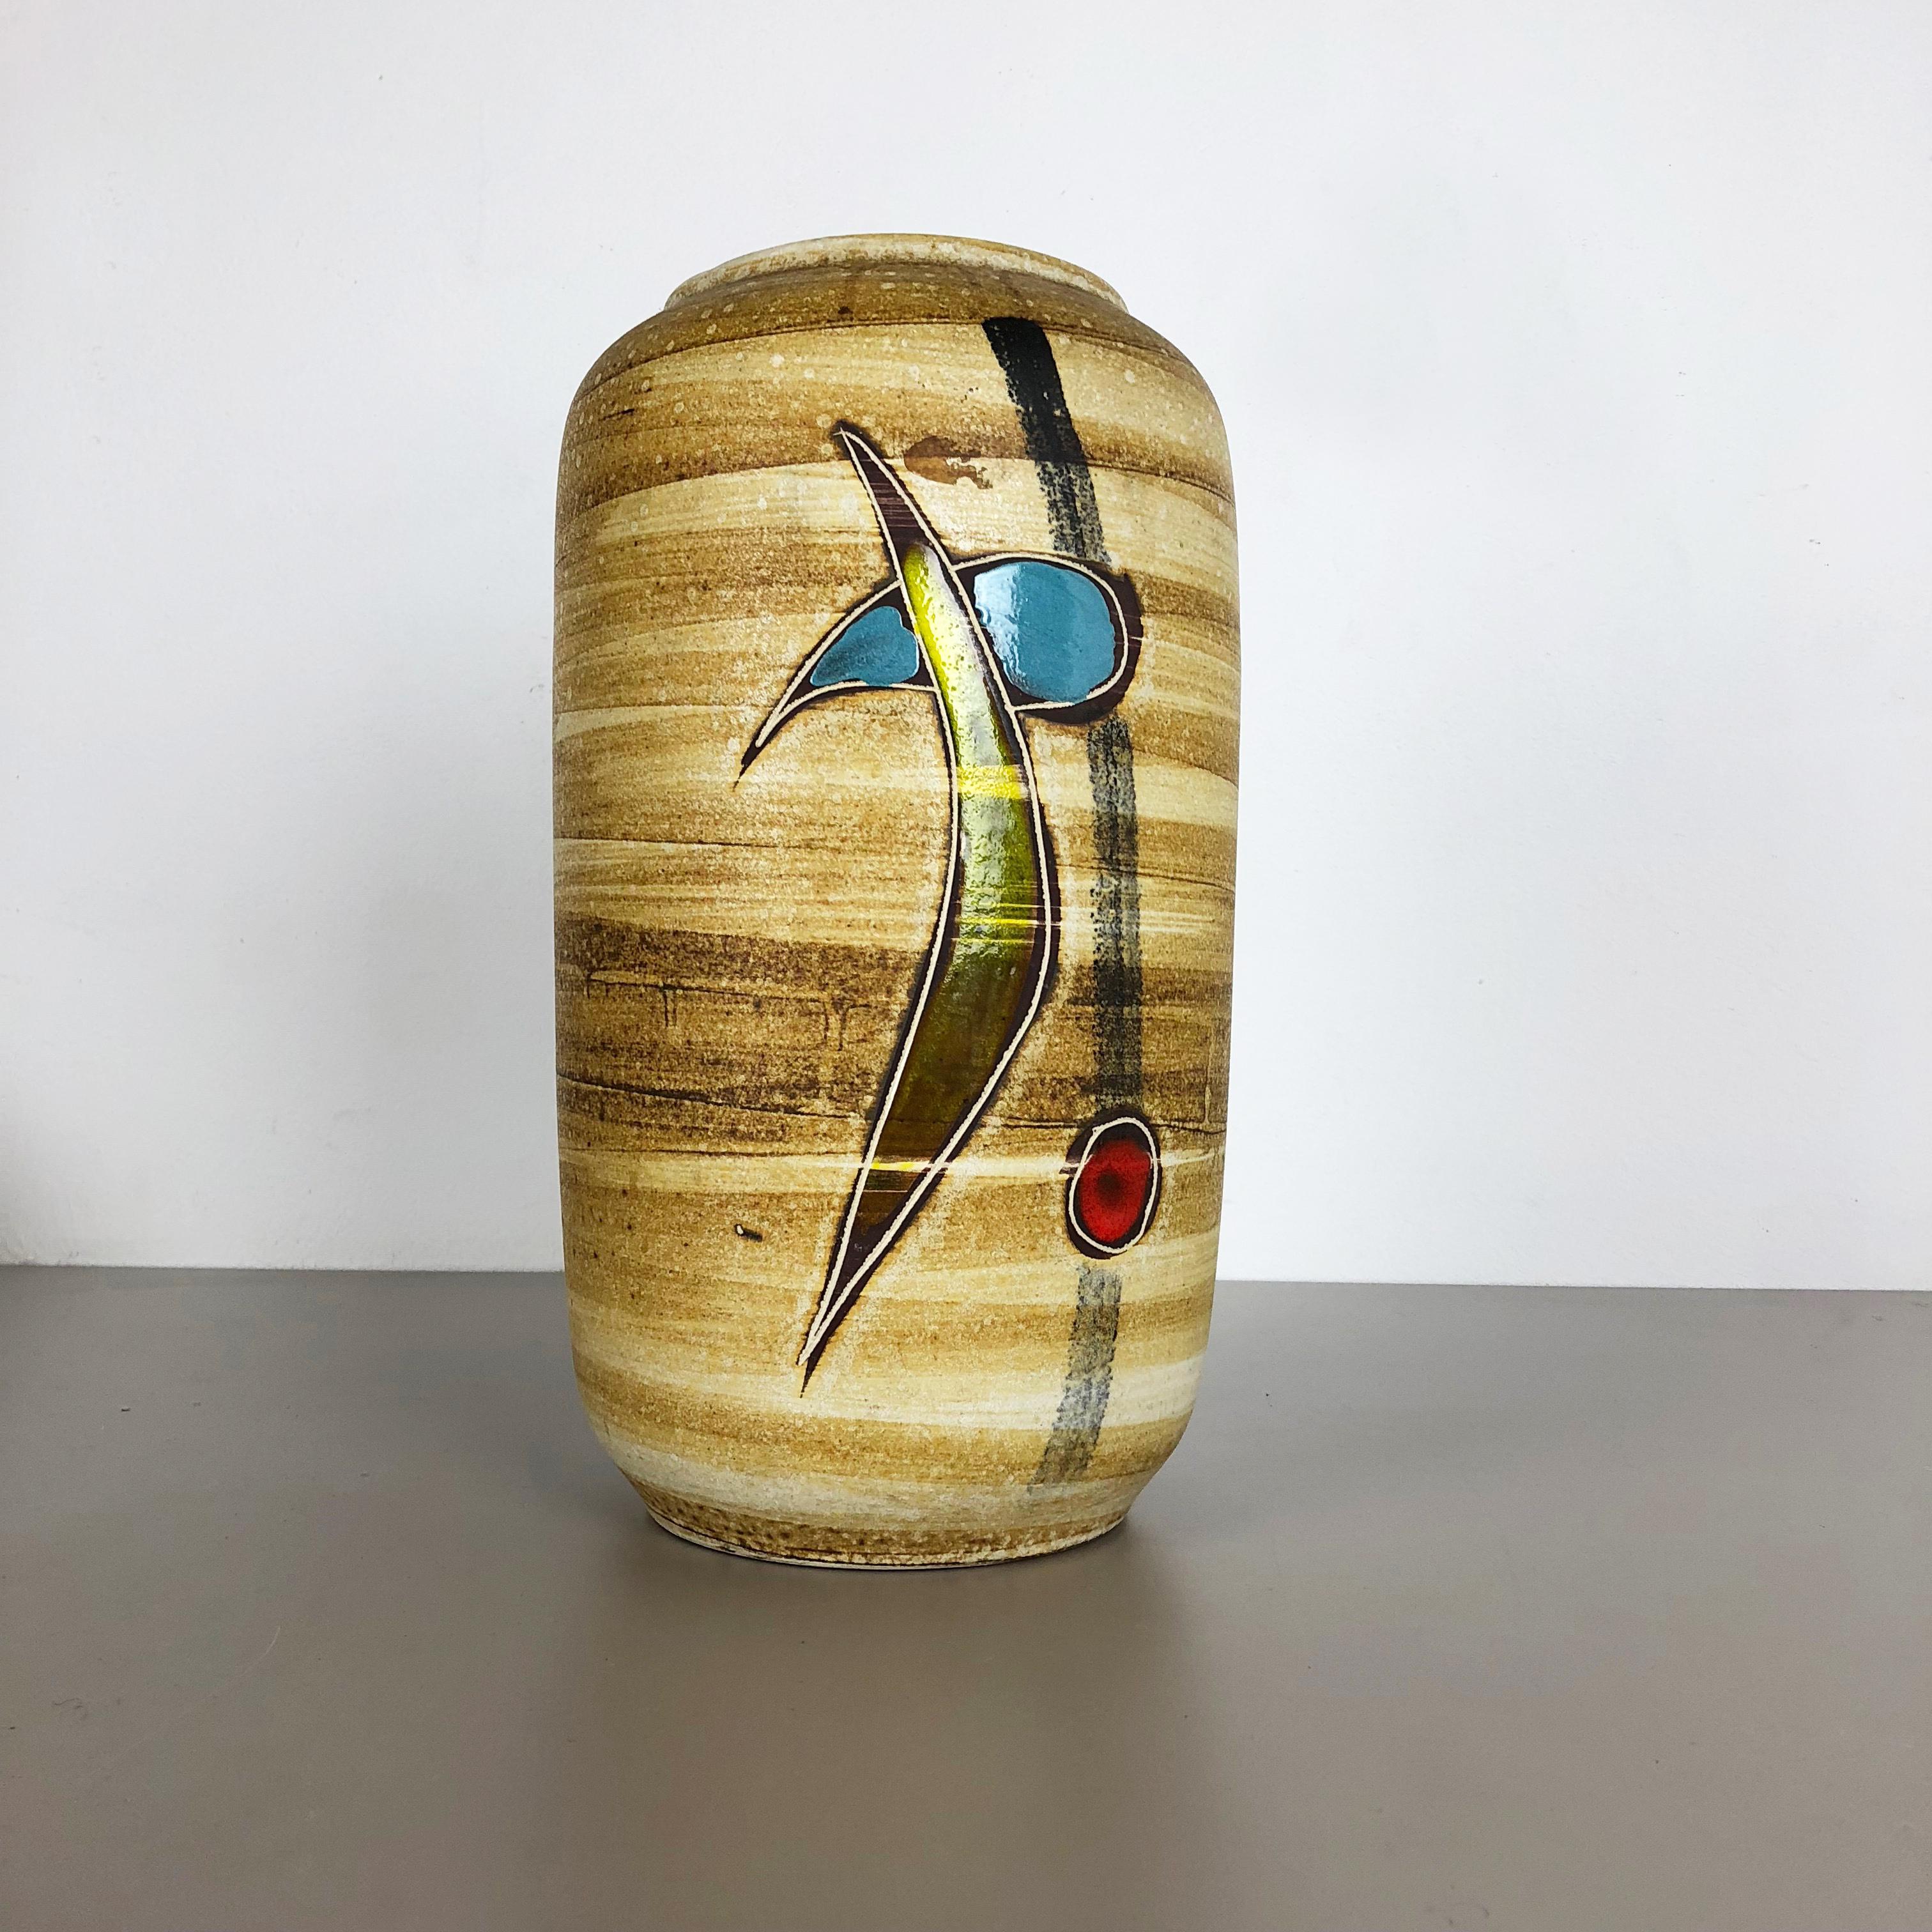 Article:

Fat lava art vase


Model: 546-40


Producer:

Scheurich, Germany



Decade:

1960s


Description:

This original vintage vase was produced in the 1960s in Germany. It is made of ceramic pottery in fat lava optic with